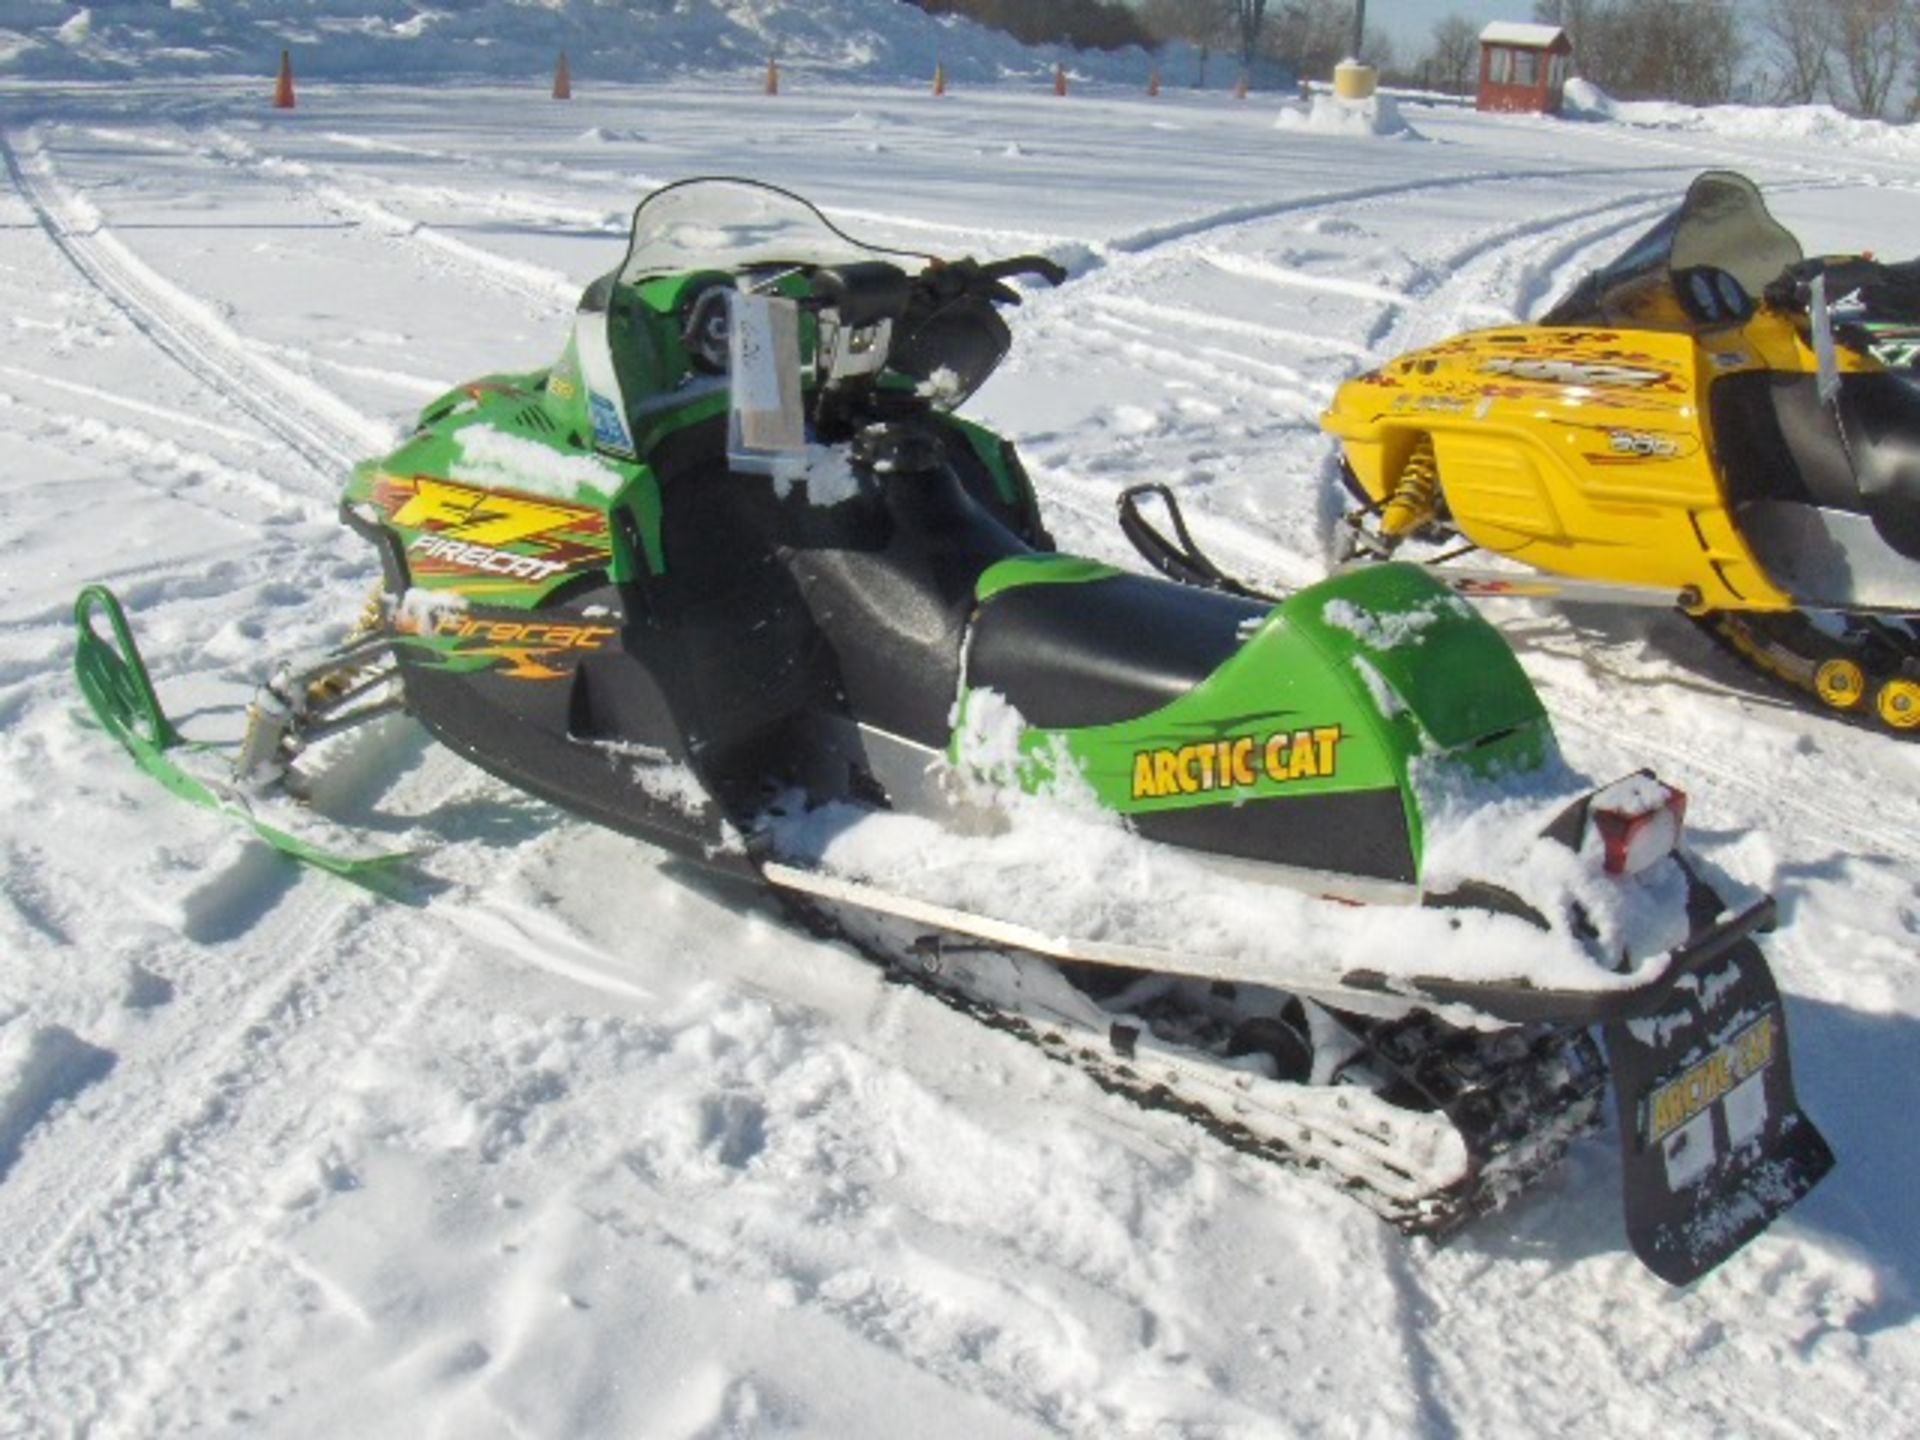 2004 ARCTIC CAT 700 F7  4UM04SNW54T138966 snowmobile, owner started at time of auction check in, - Image 4 of 4